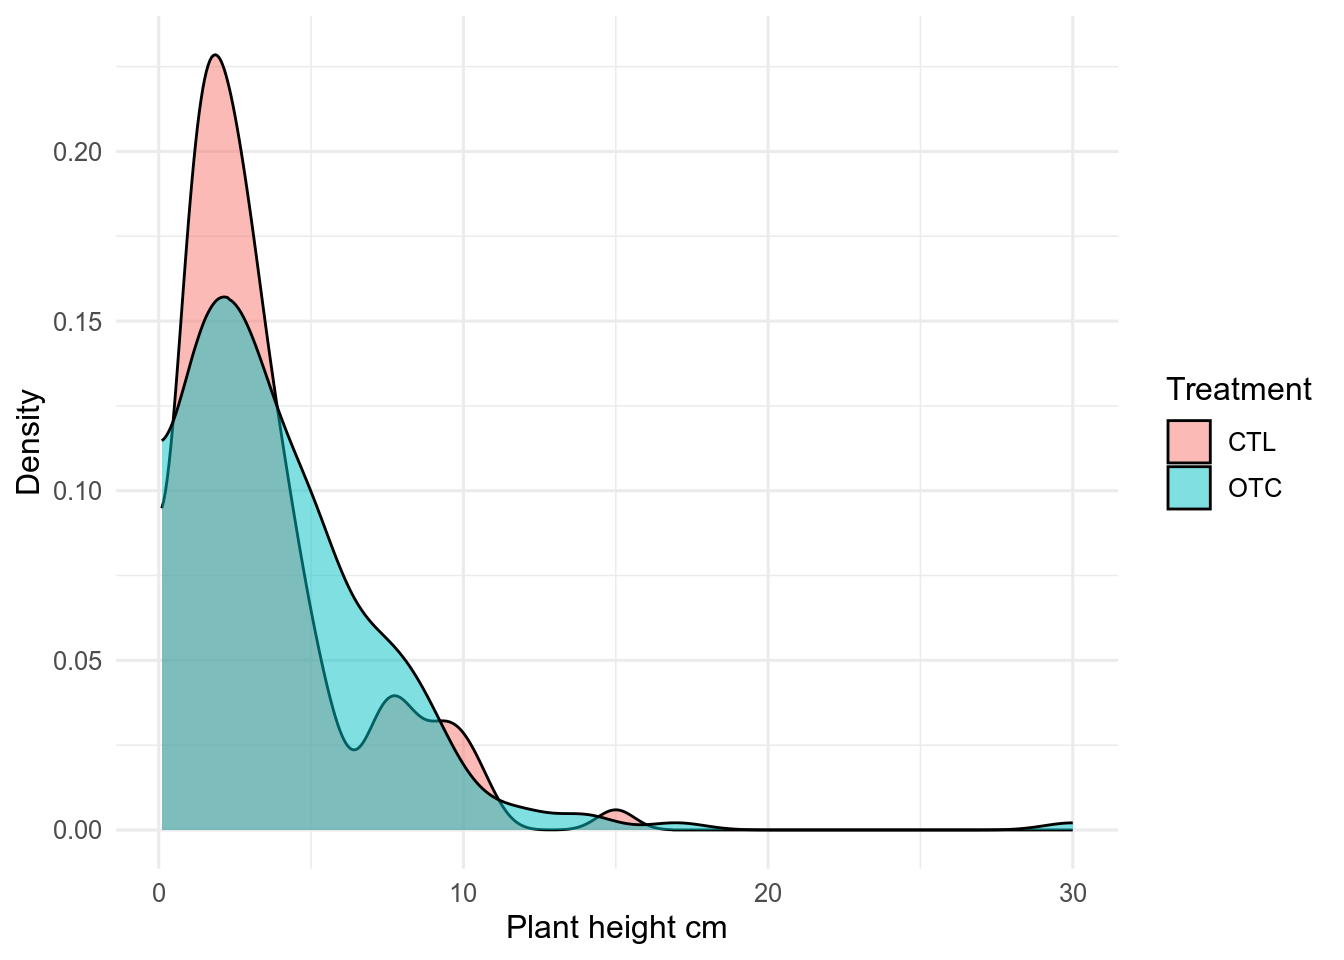 A density plot of plant heights made with ggplot2